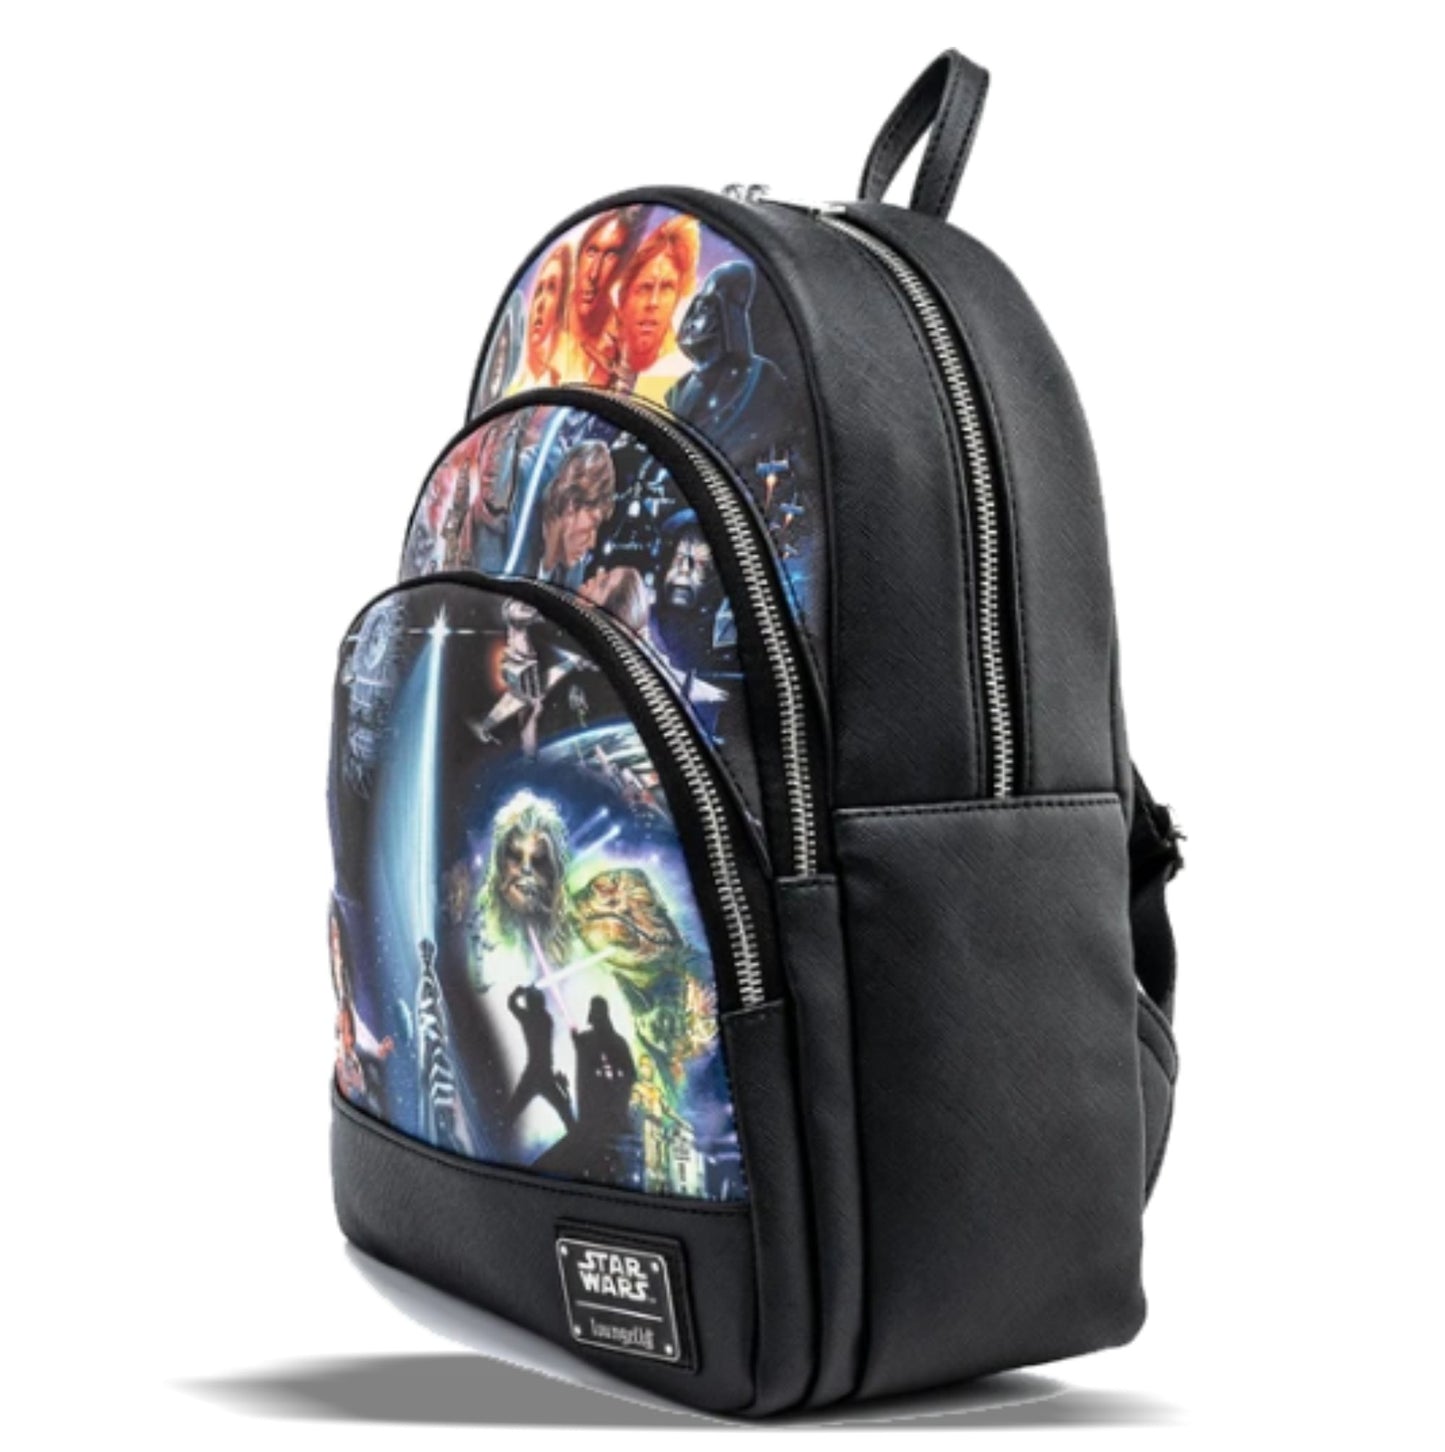 Loungefly x Star Wars May The Force Be With You Mini Backpack